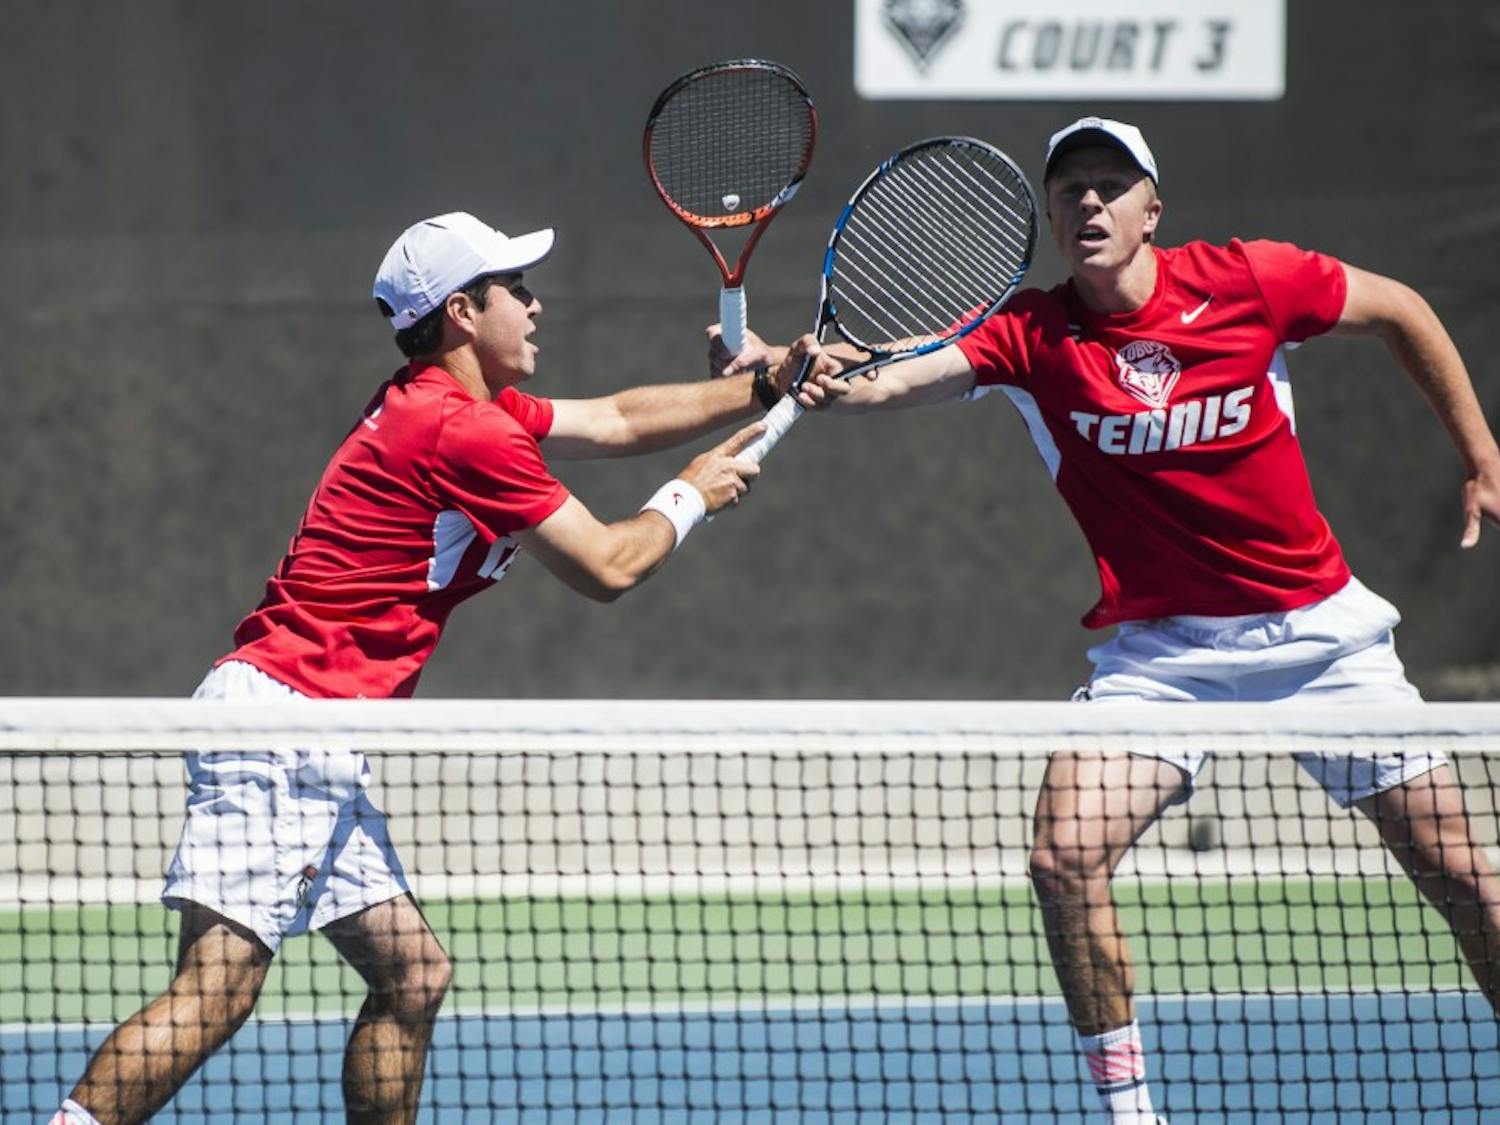 Redshirt junior Rodolfo Jauregui (left) and junior Hayden Sabatka play against Boise State in a doubles match on Sunday at the McKinnon Family Tennis Stadium. The men's tennis team will play San Diego this Friday while the the women’s team plays Boise State.